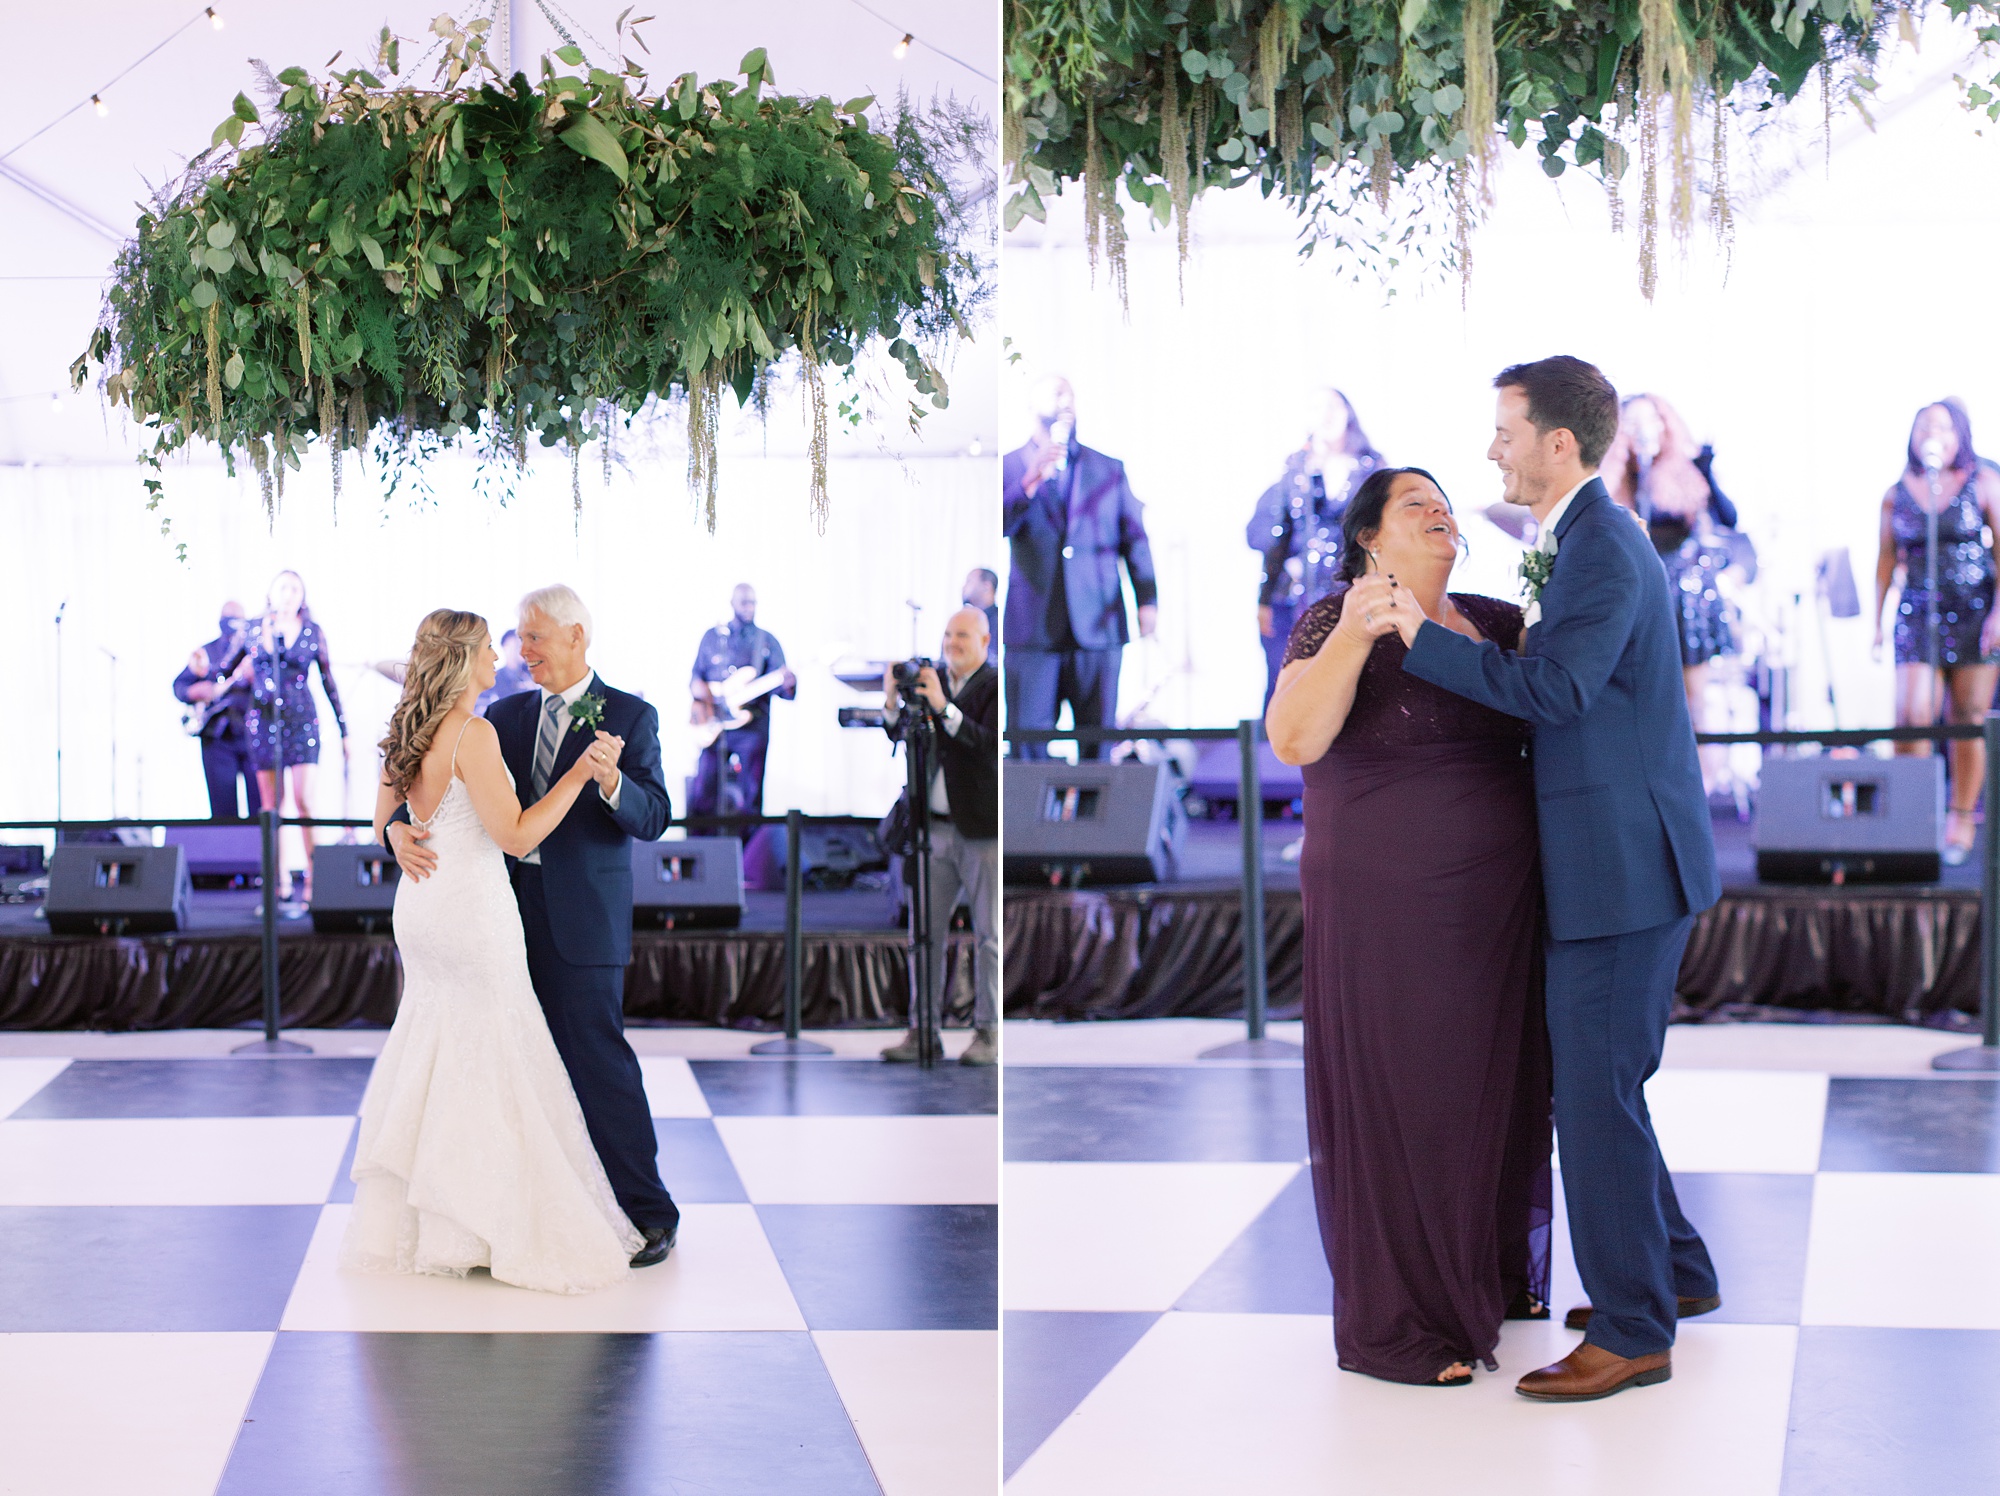 parent dances during wedding reception at The Dairy Barn